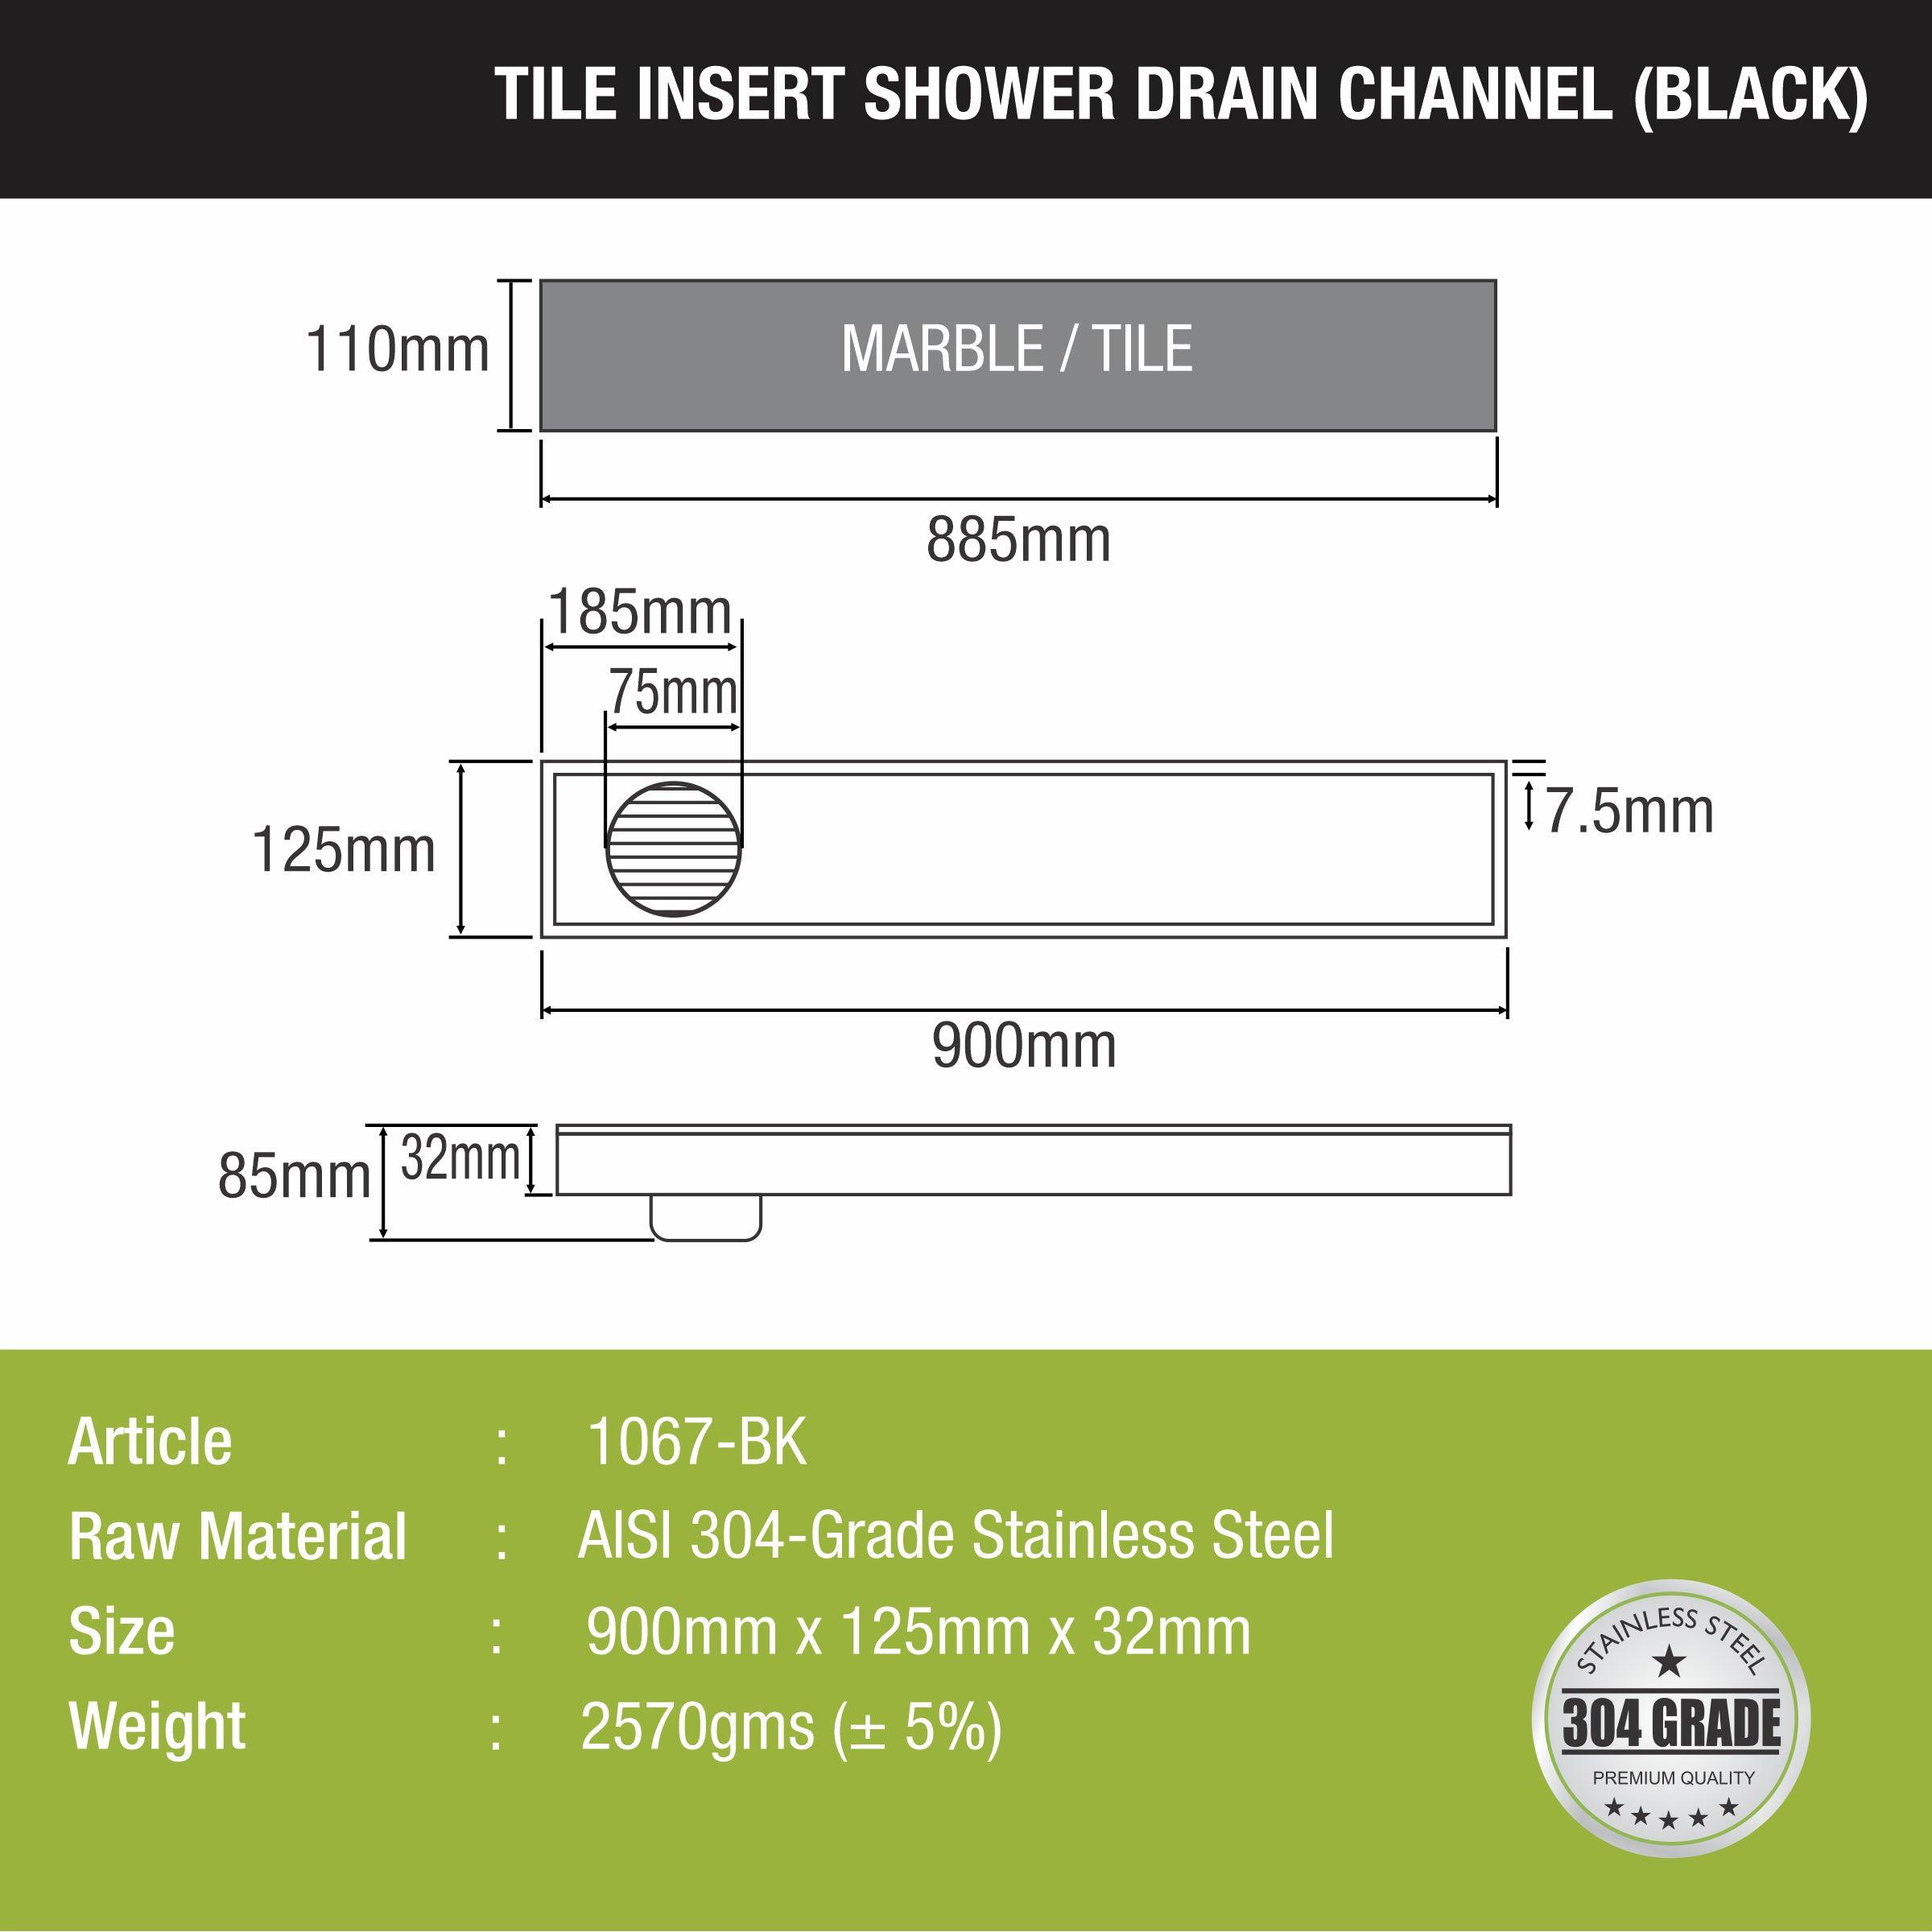 Tile Insert Shower Drain Channel - Black (36 x 5 Inches) size and measurement